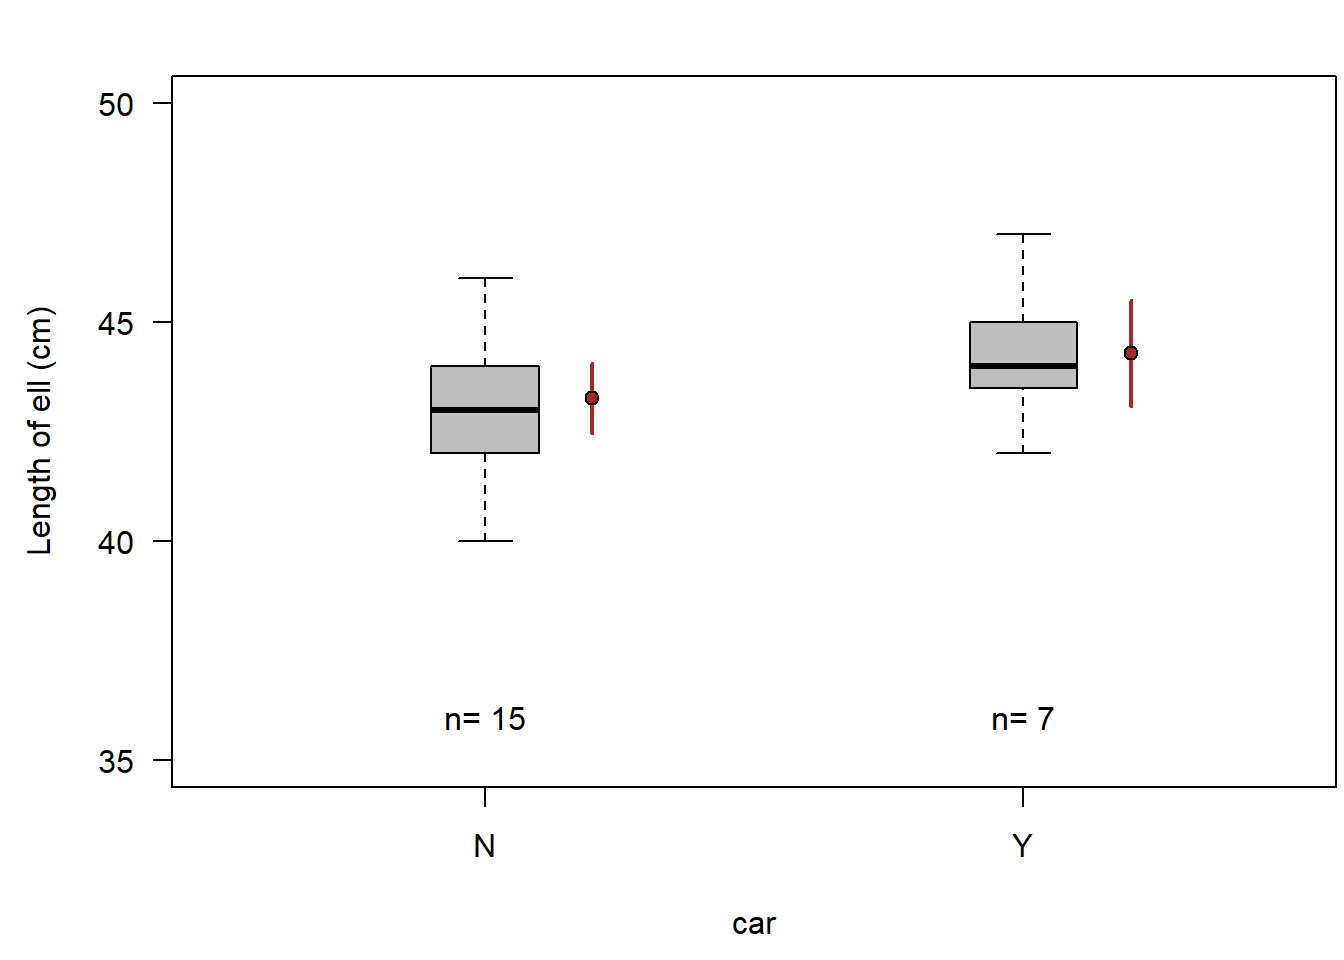 Ell length of car owners (Y) and people not owning a car (N). Horizontal bar = median, box = interquartile range, whiskers = extremest observation within 1.5 times the interquartile range from the quartile, circles=observations farther than 1.5 times the interquartile range from the quartile. Filled brown circles = means, vertical brown bars = 95% compatibility interval.